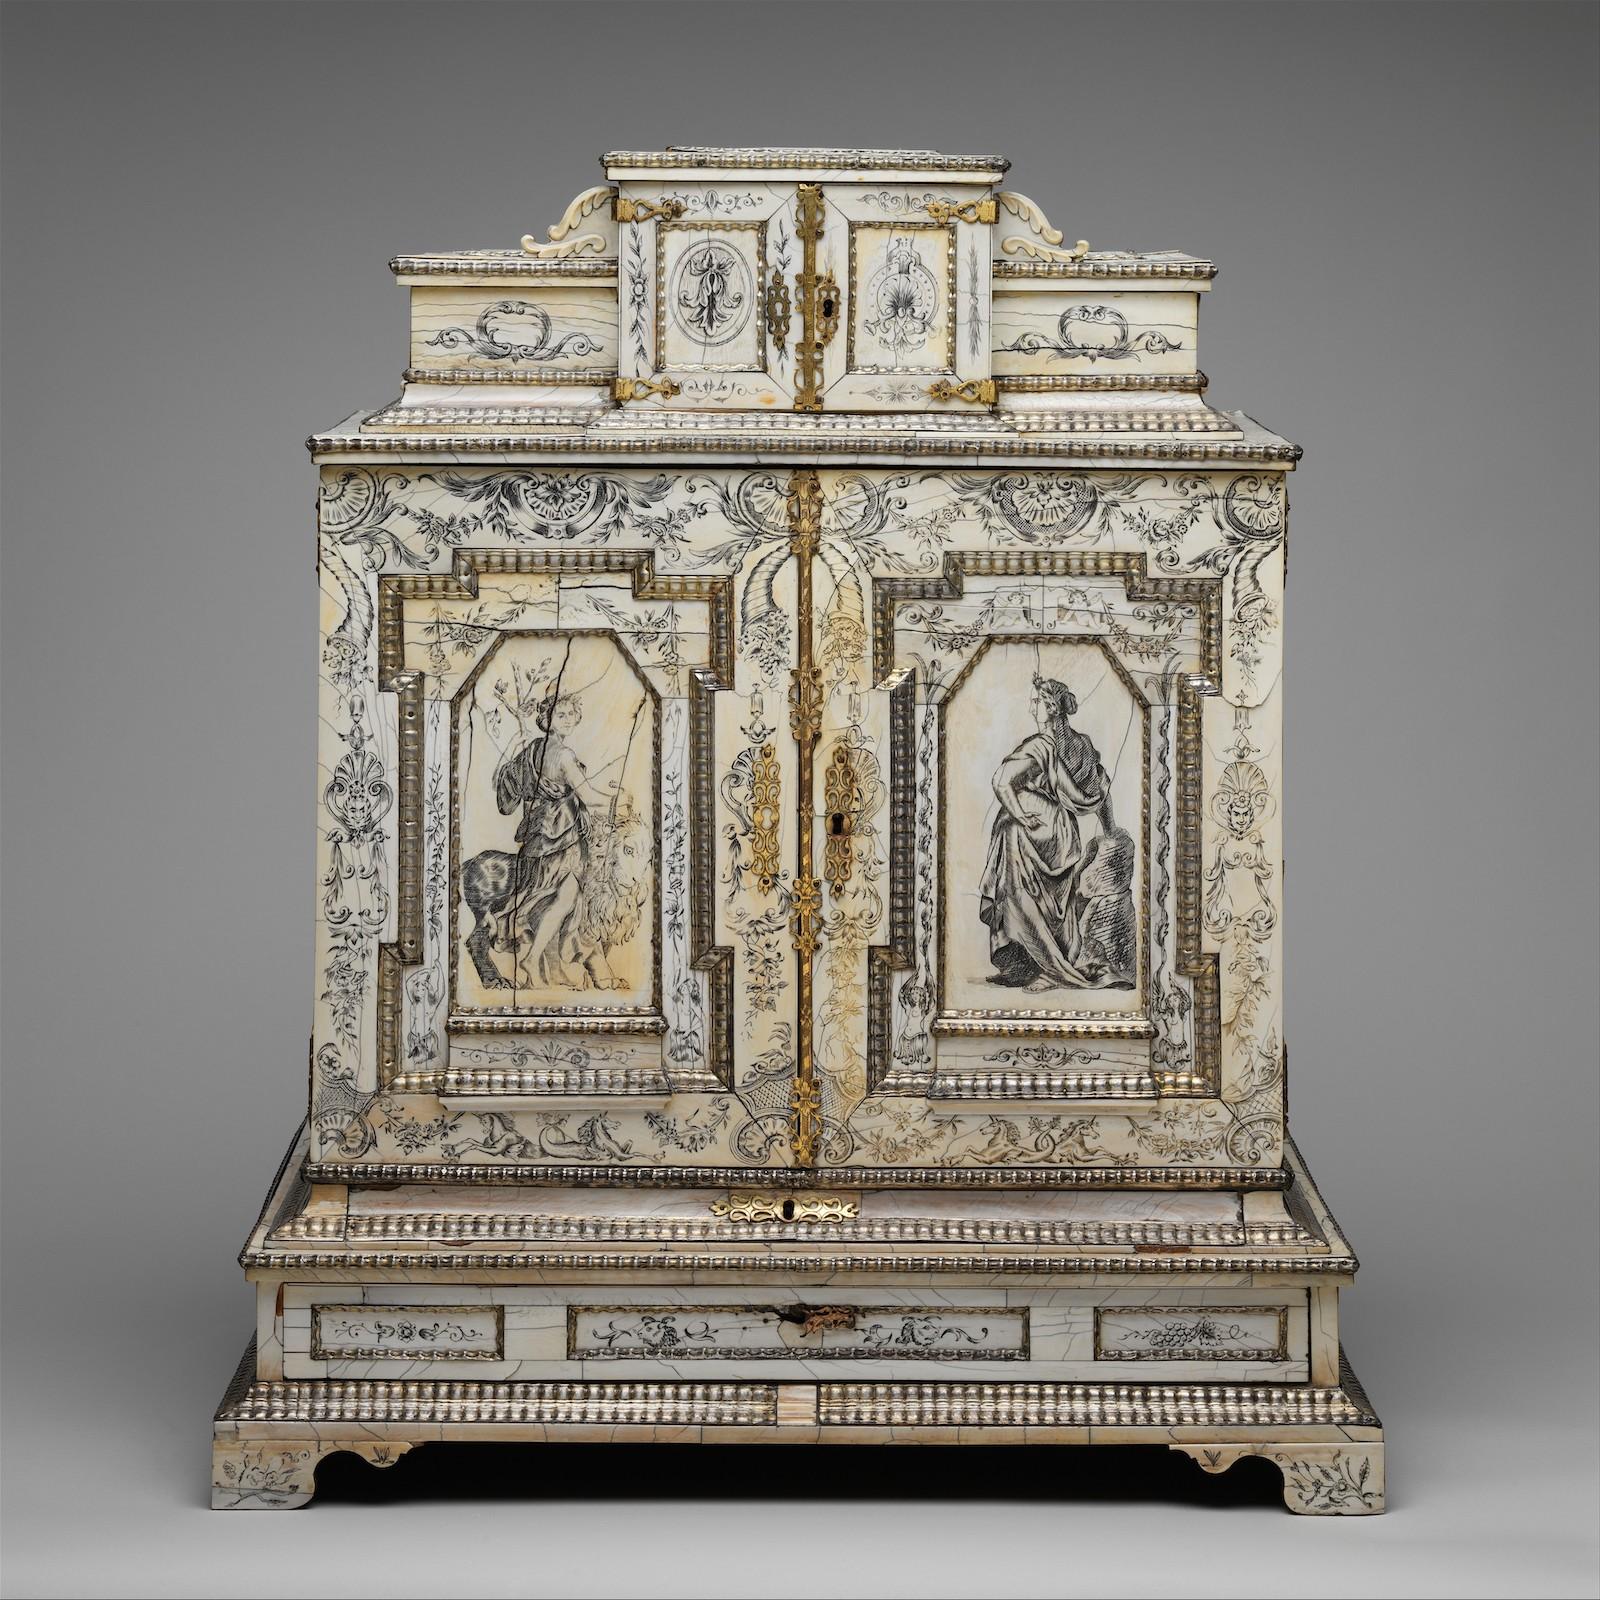 Closed view of the incredibly intricate Cabinet 